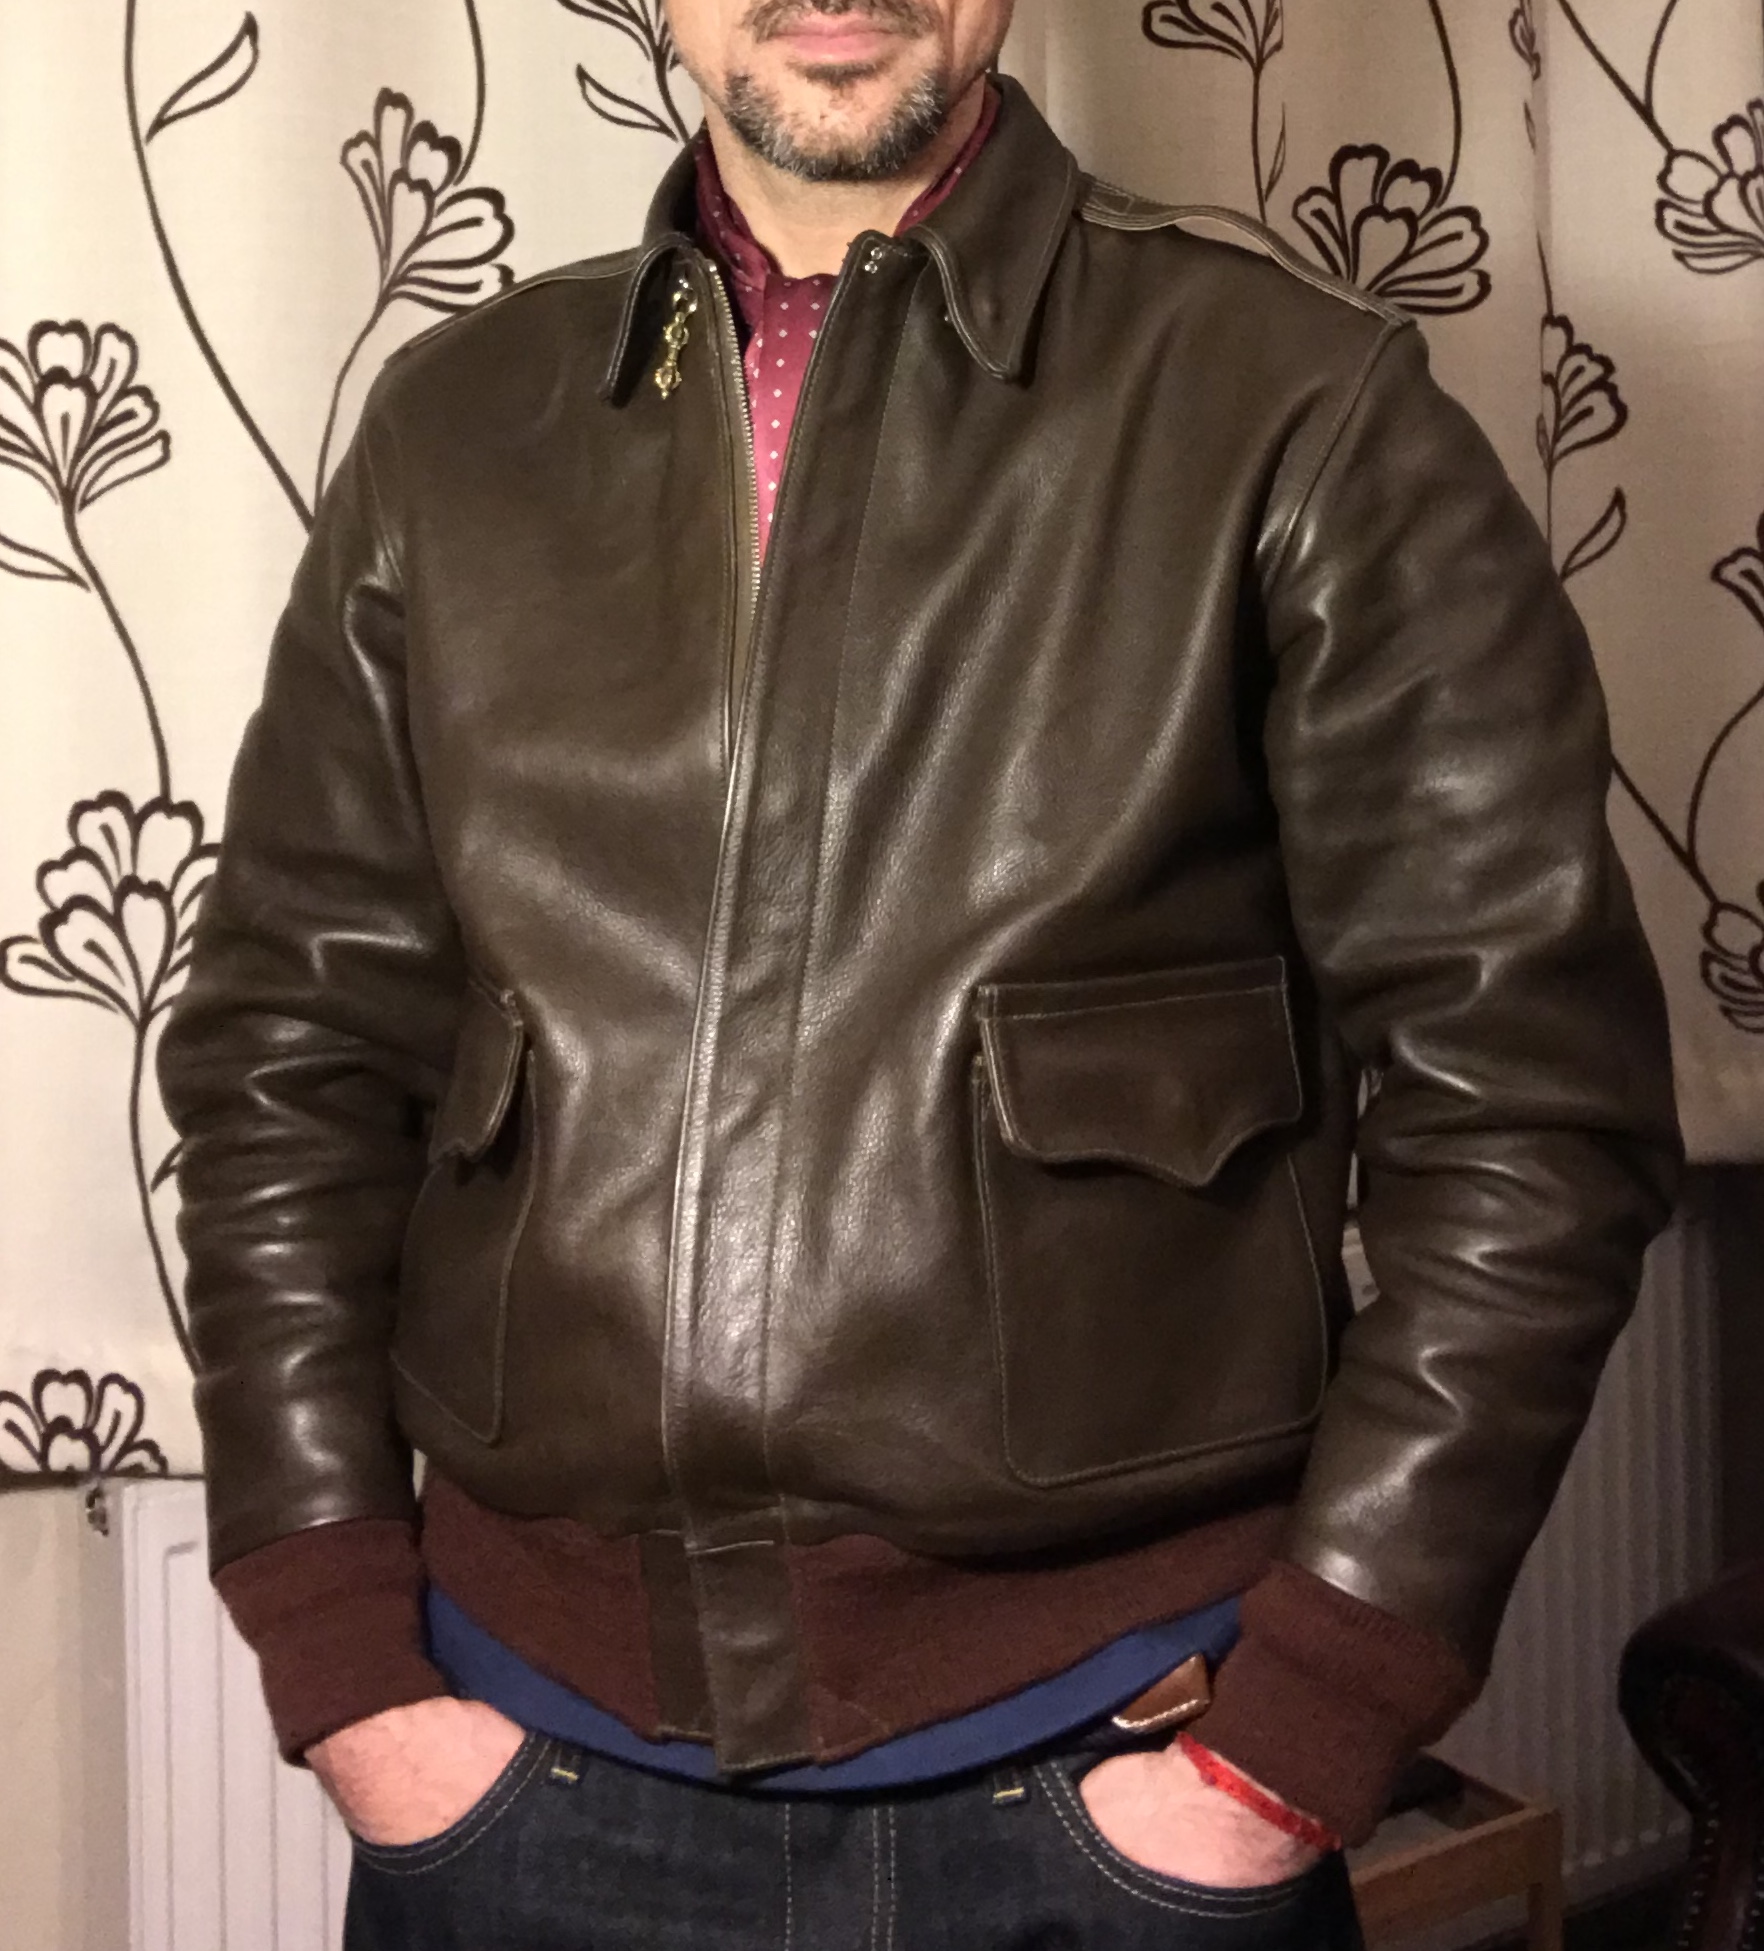 Ja Dubow 27798 (Platon) A-2 jacket review and pics | Page 23 | Vintage ...